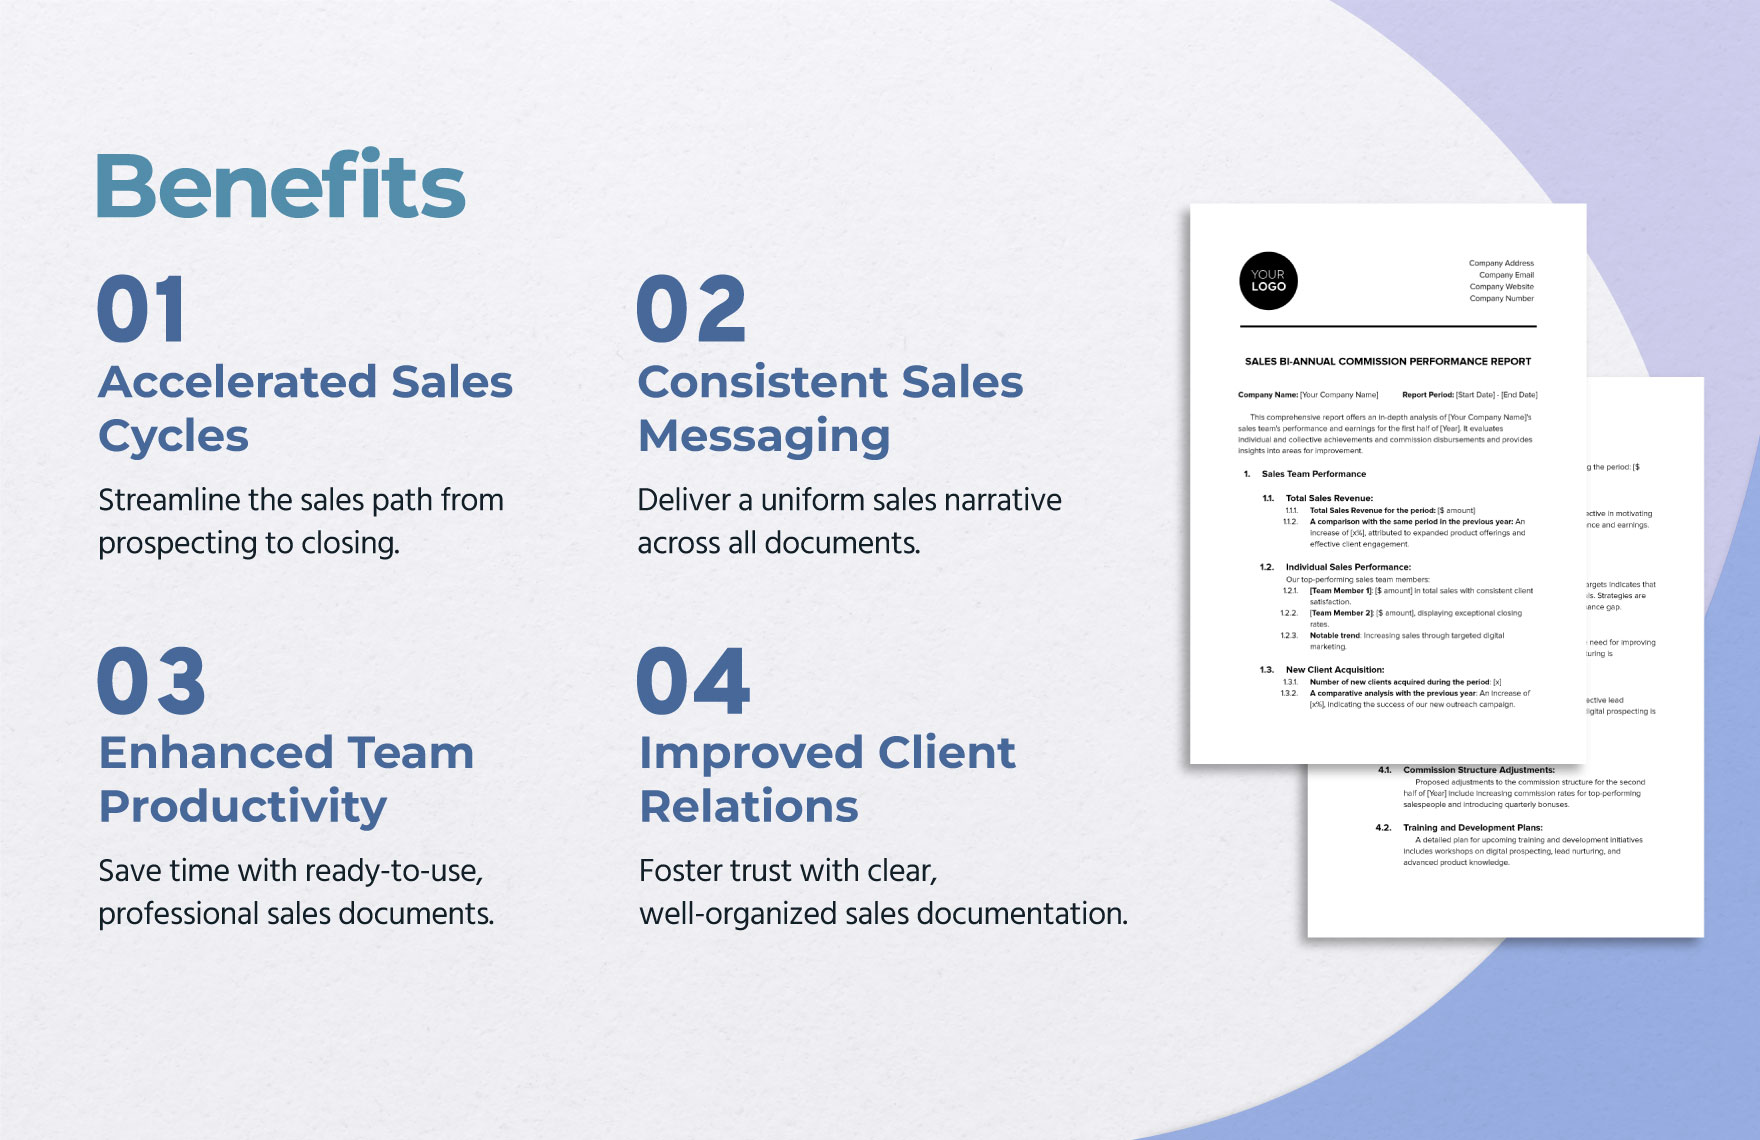 Sales Bi-Annual Commission Performance Report Template